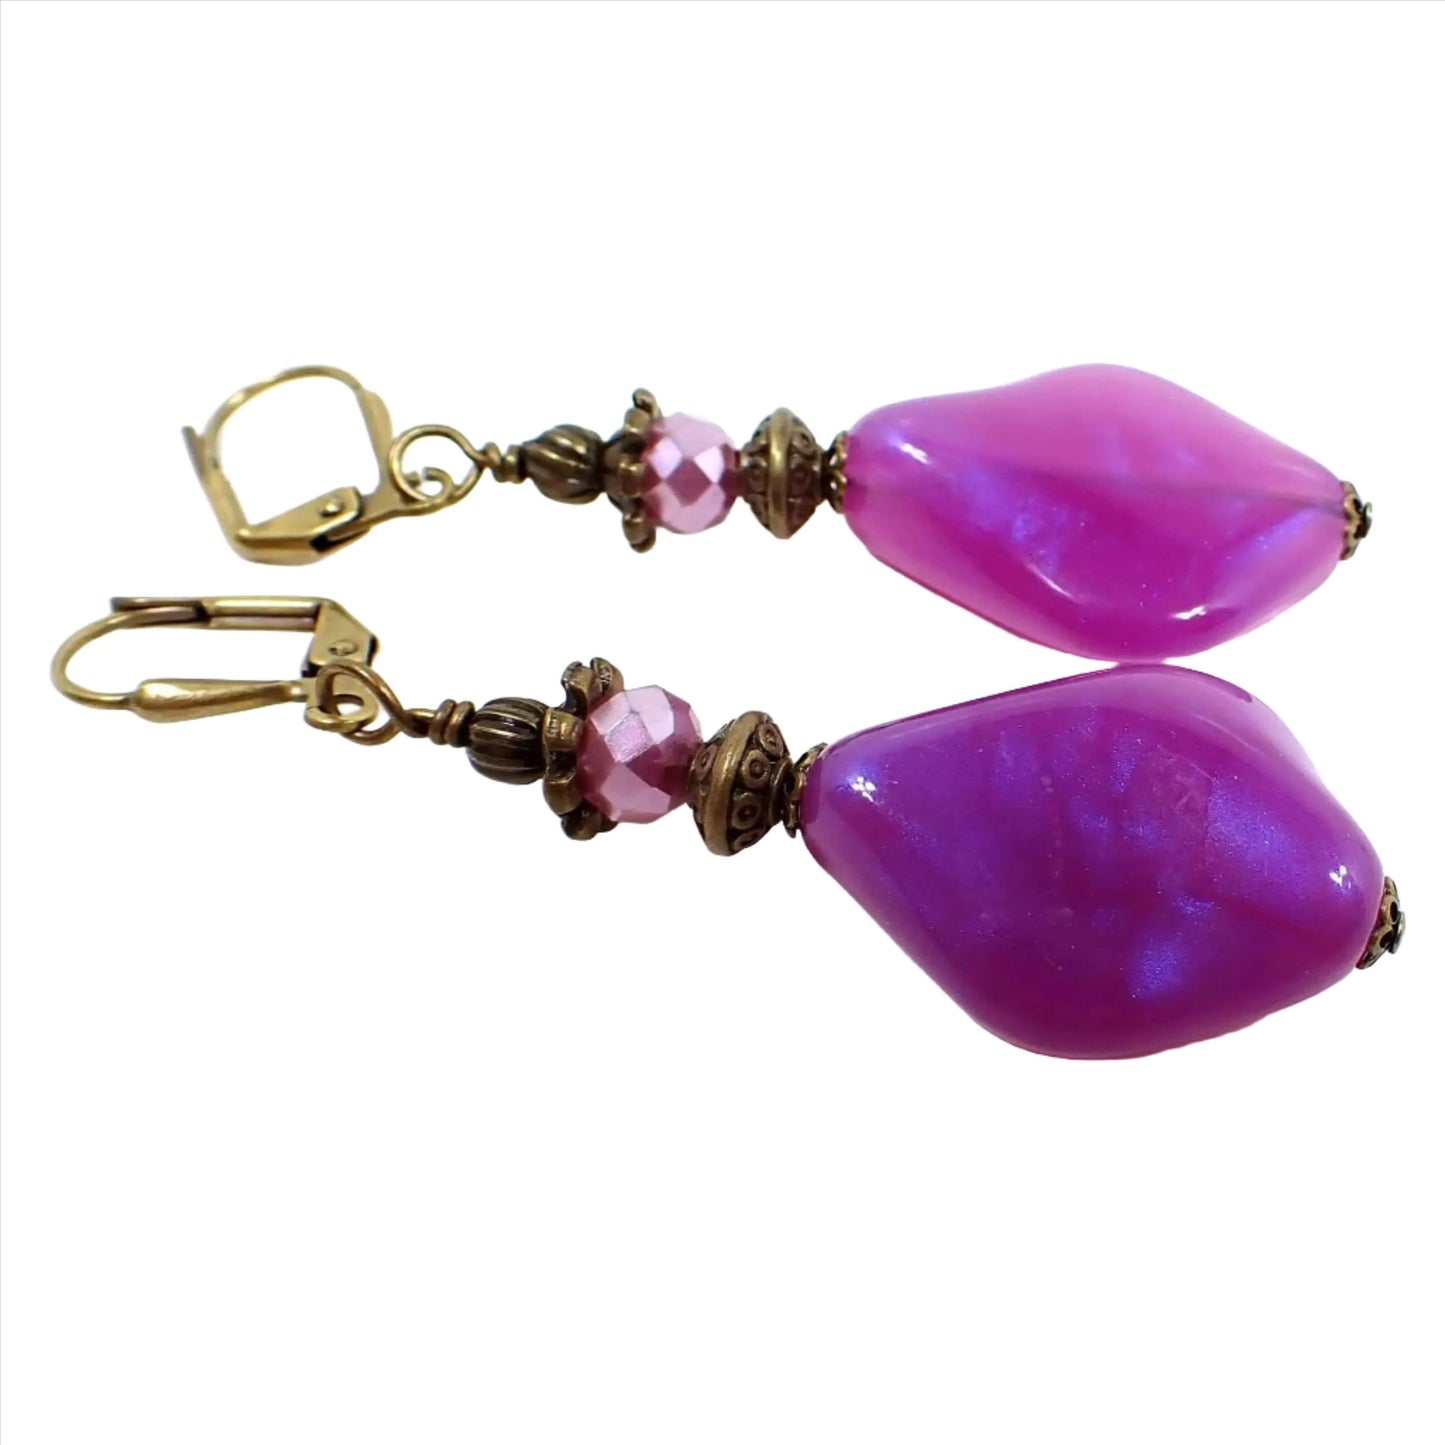 Front view of the handmade color shift purple lucite earrings. The metal is antiqued brass in color. There are pearly glass faceted beads at the top and angled teardrop beads at the bottom. The bottom beads have an indented curve and are bright purple in color with hints of sparkly purple as you move around.